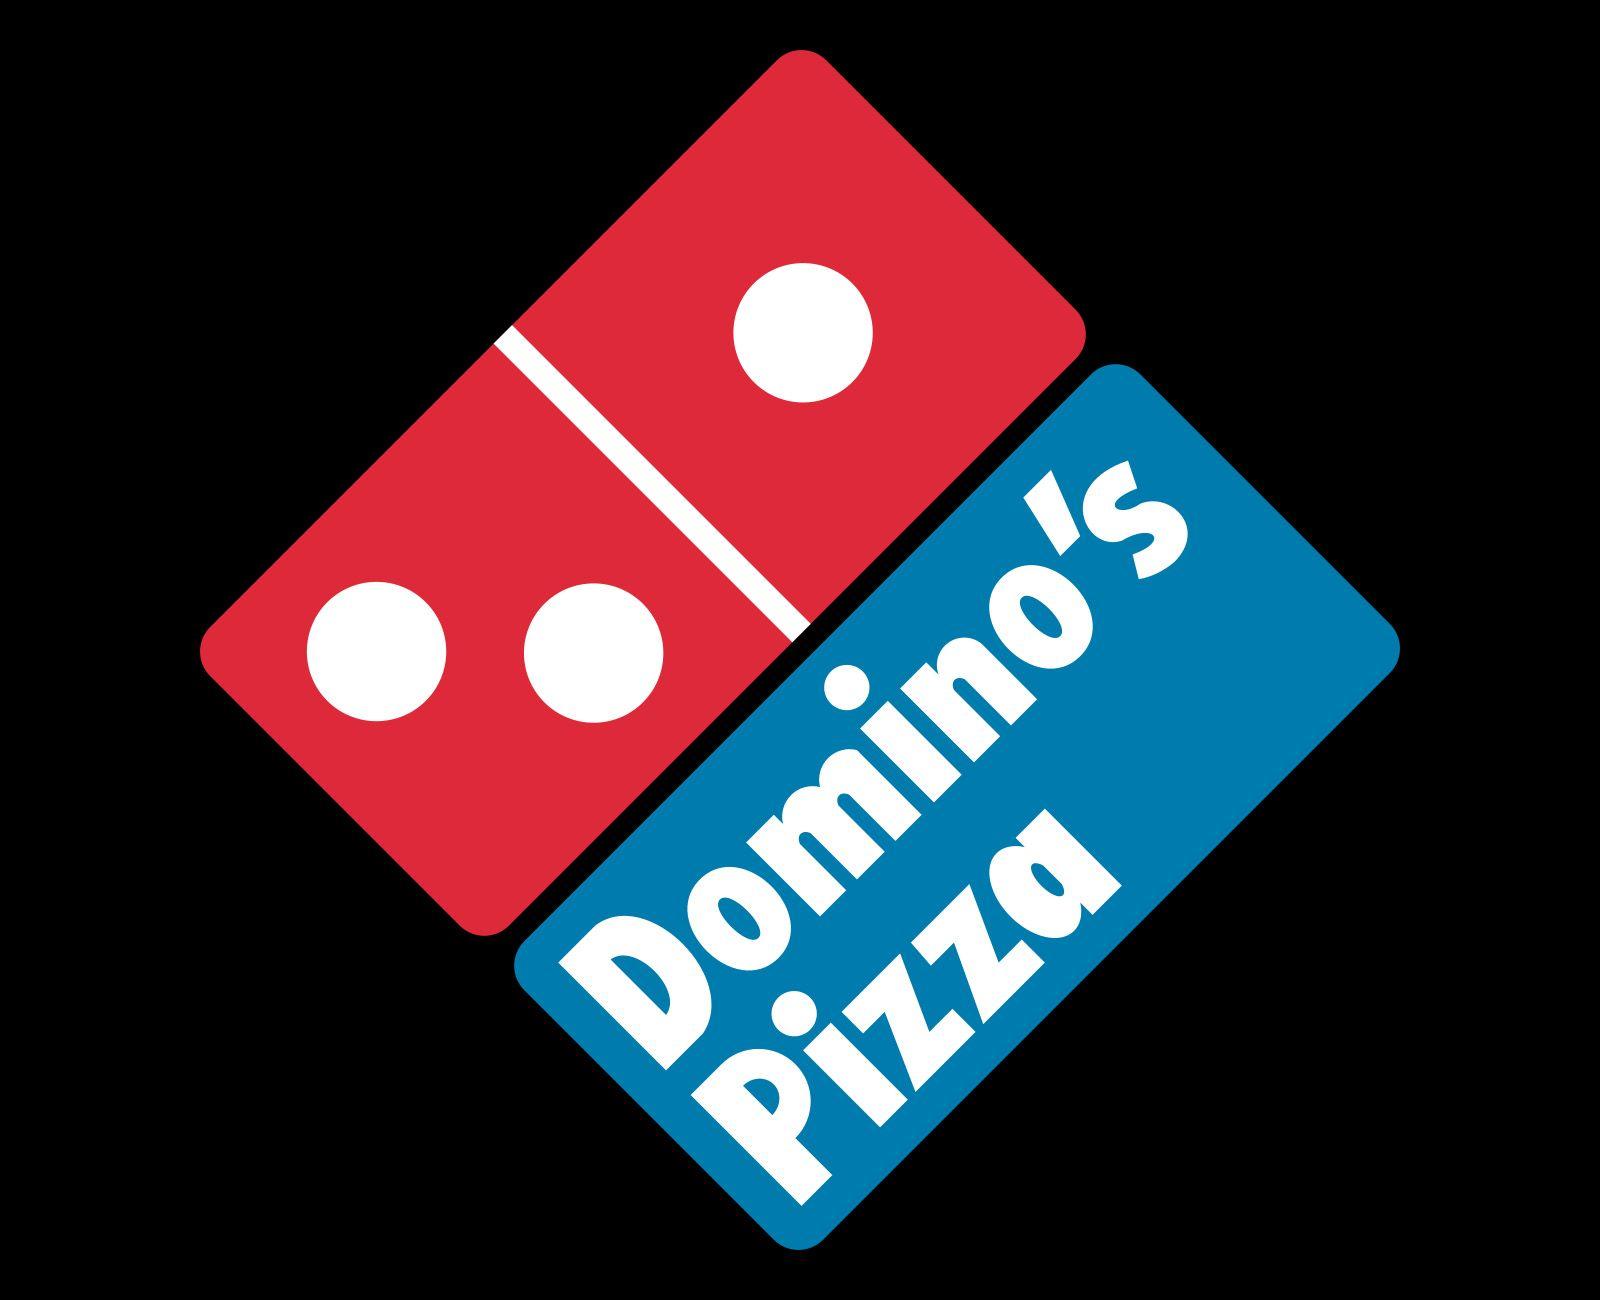 Old Domino's Pizza Logo - Domino's Logo, Domino's Symbol, Meaning, History and Evolution